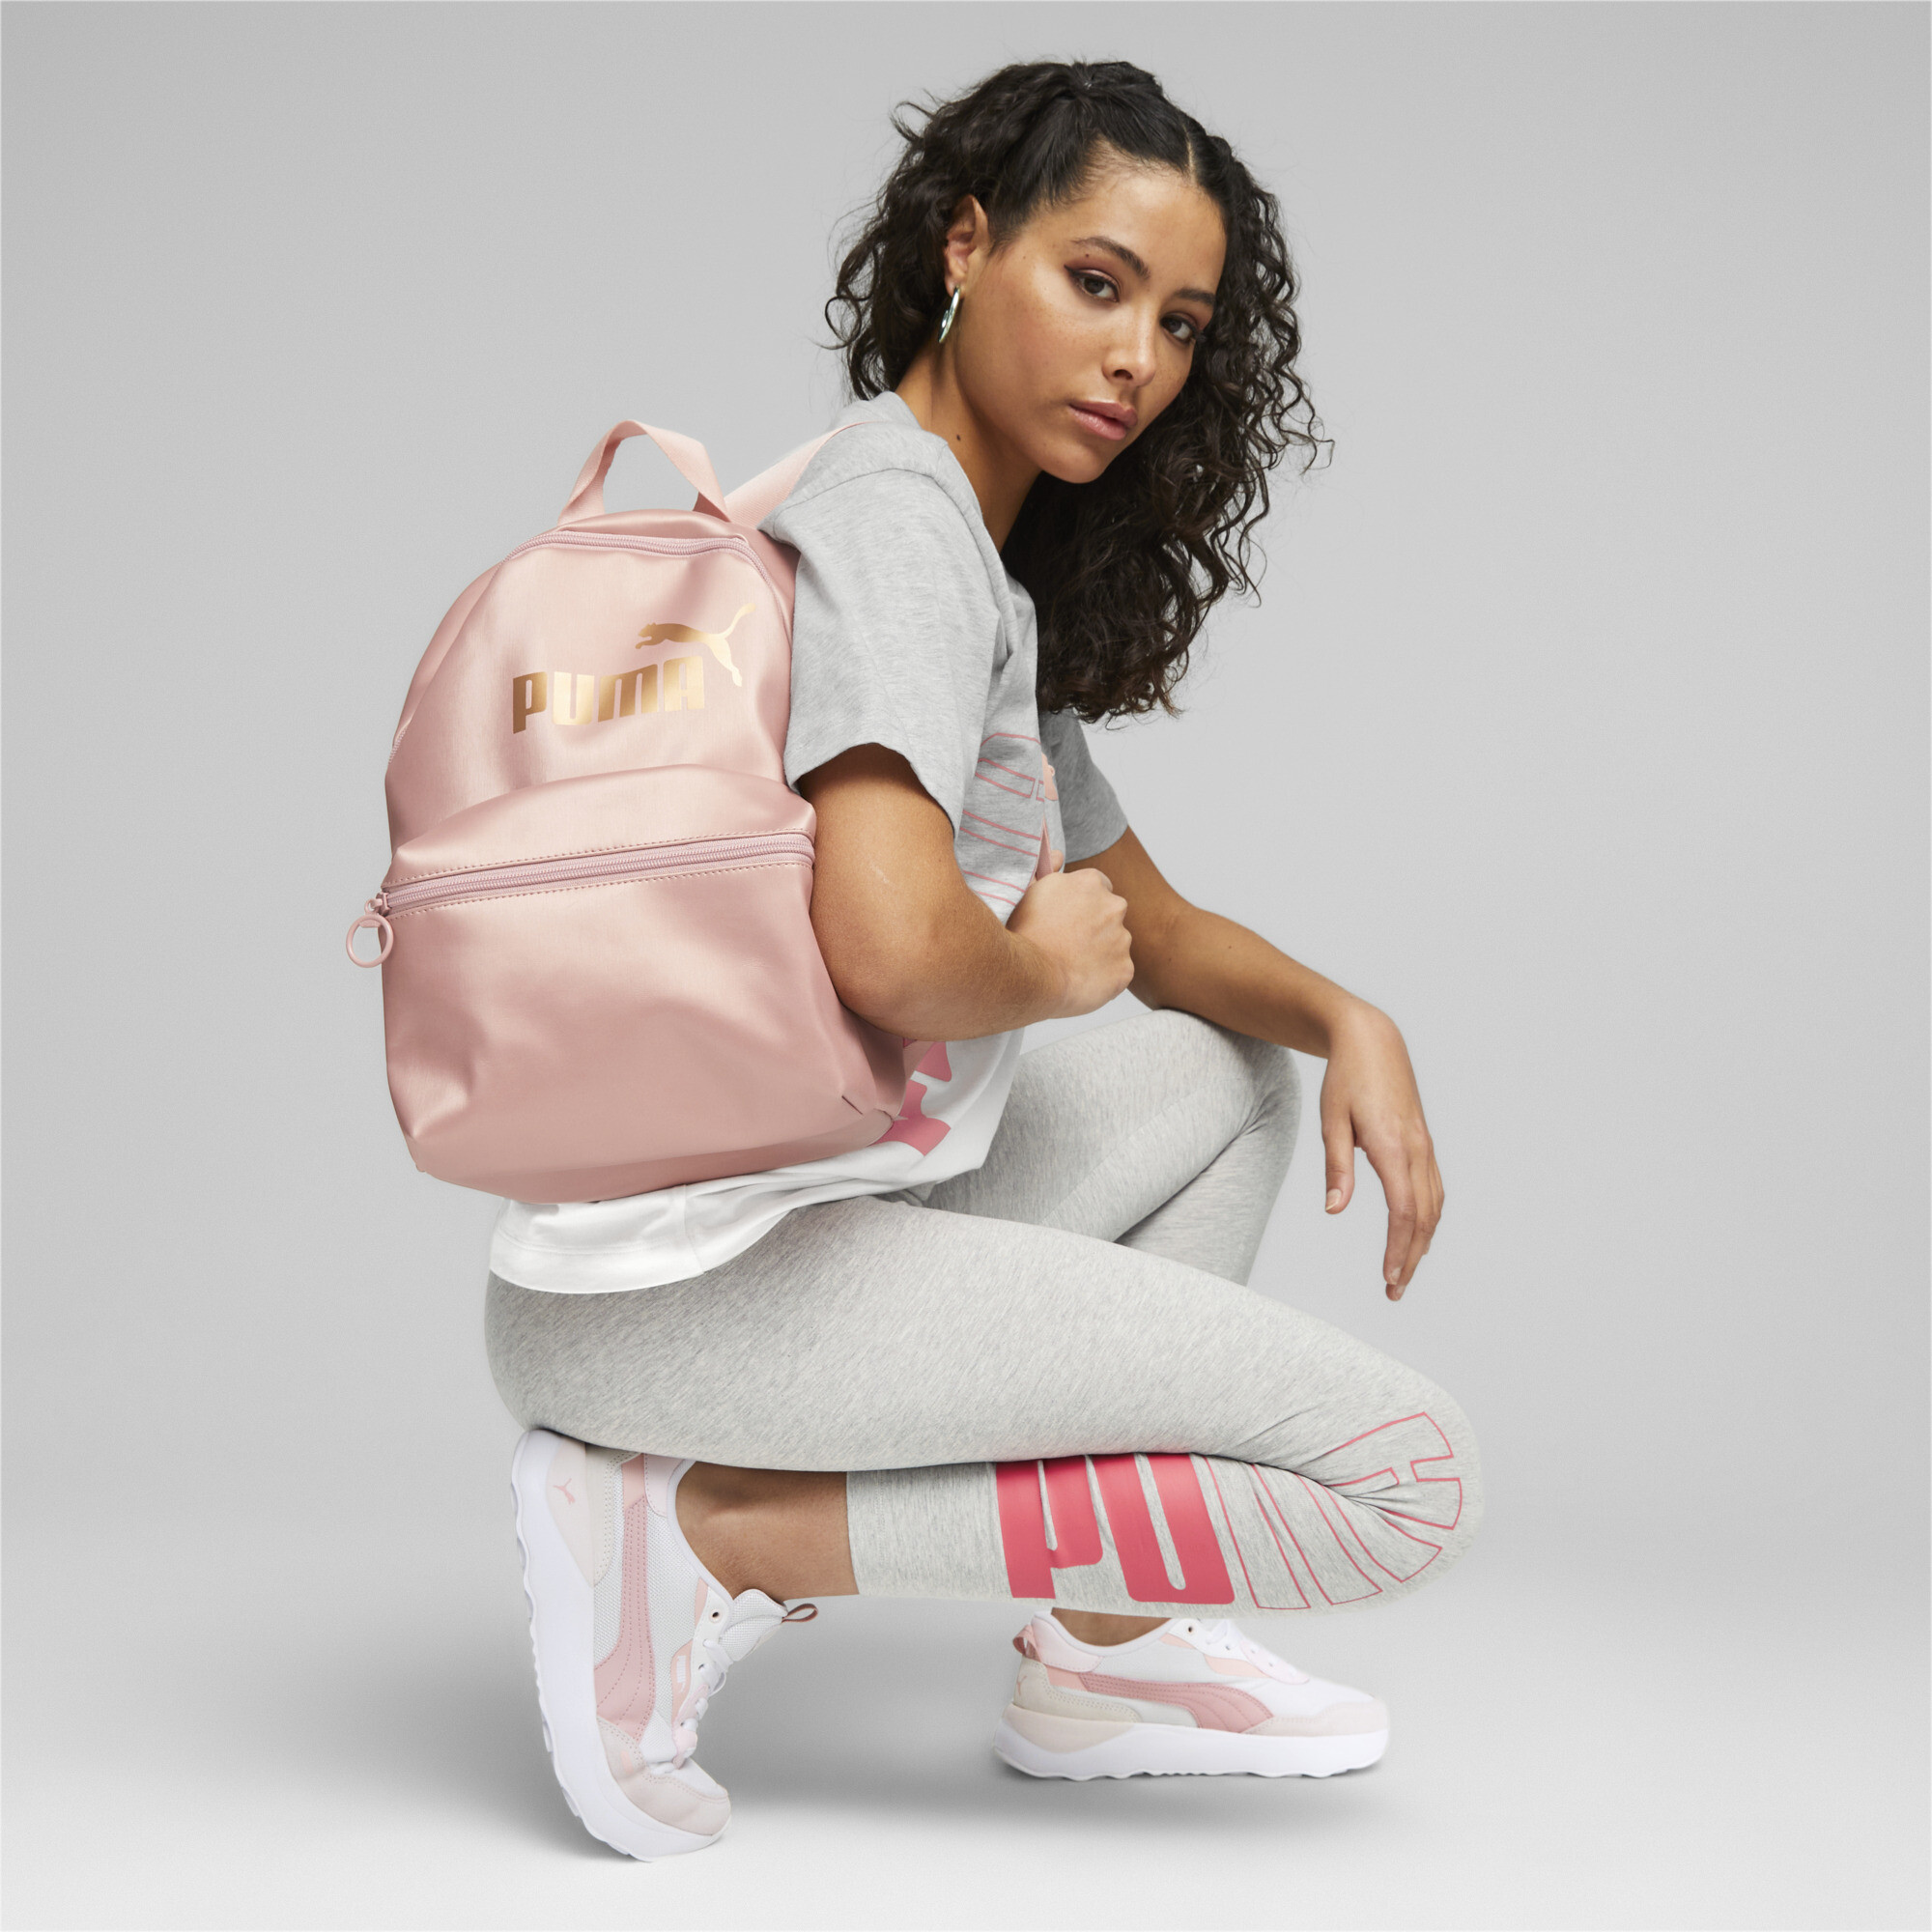 Women's Puma Core Up Backpack, Pink, Accessories